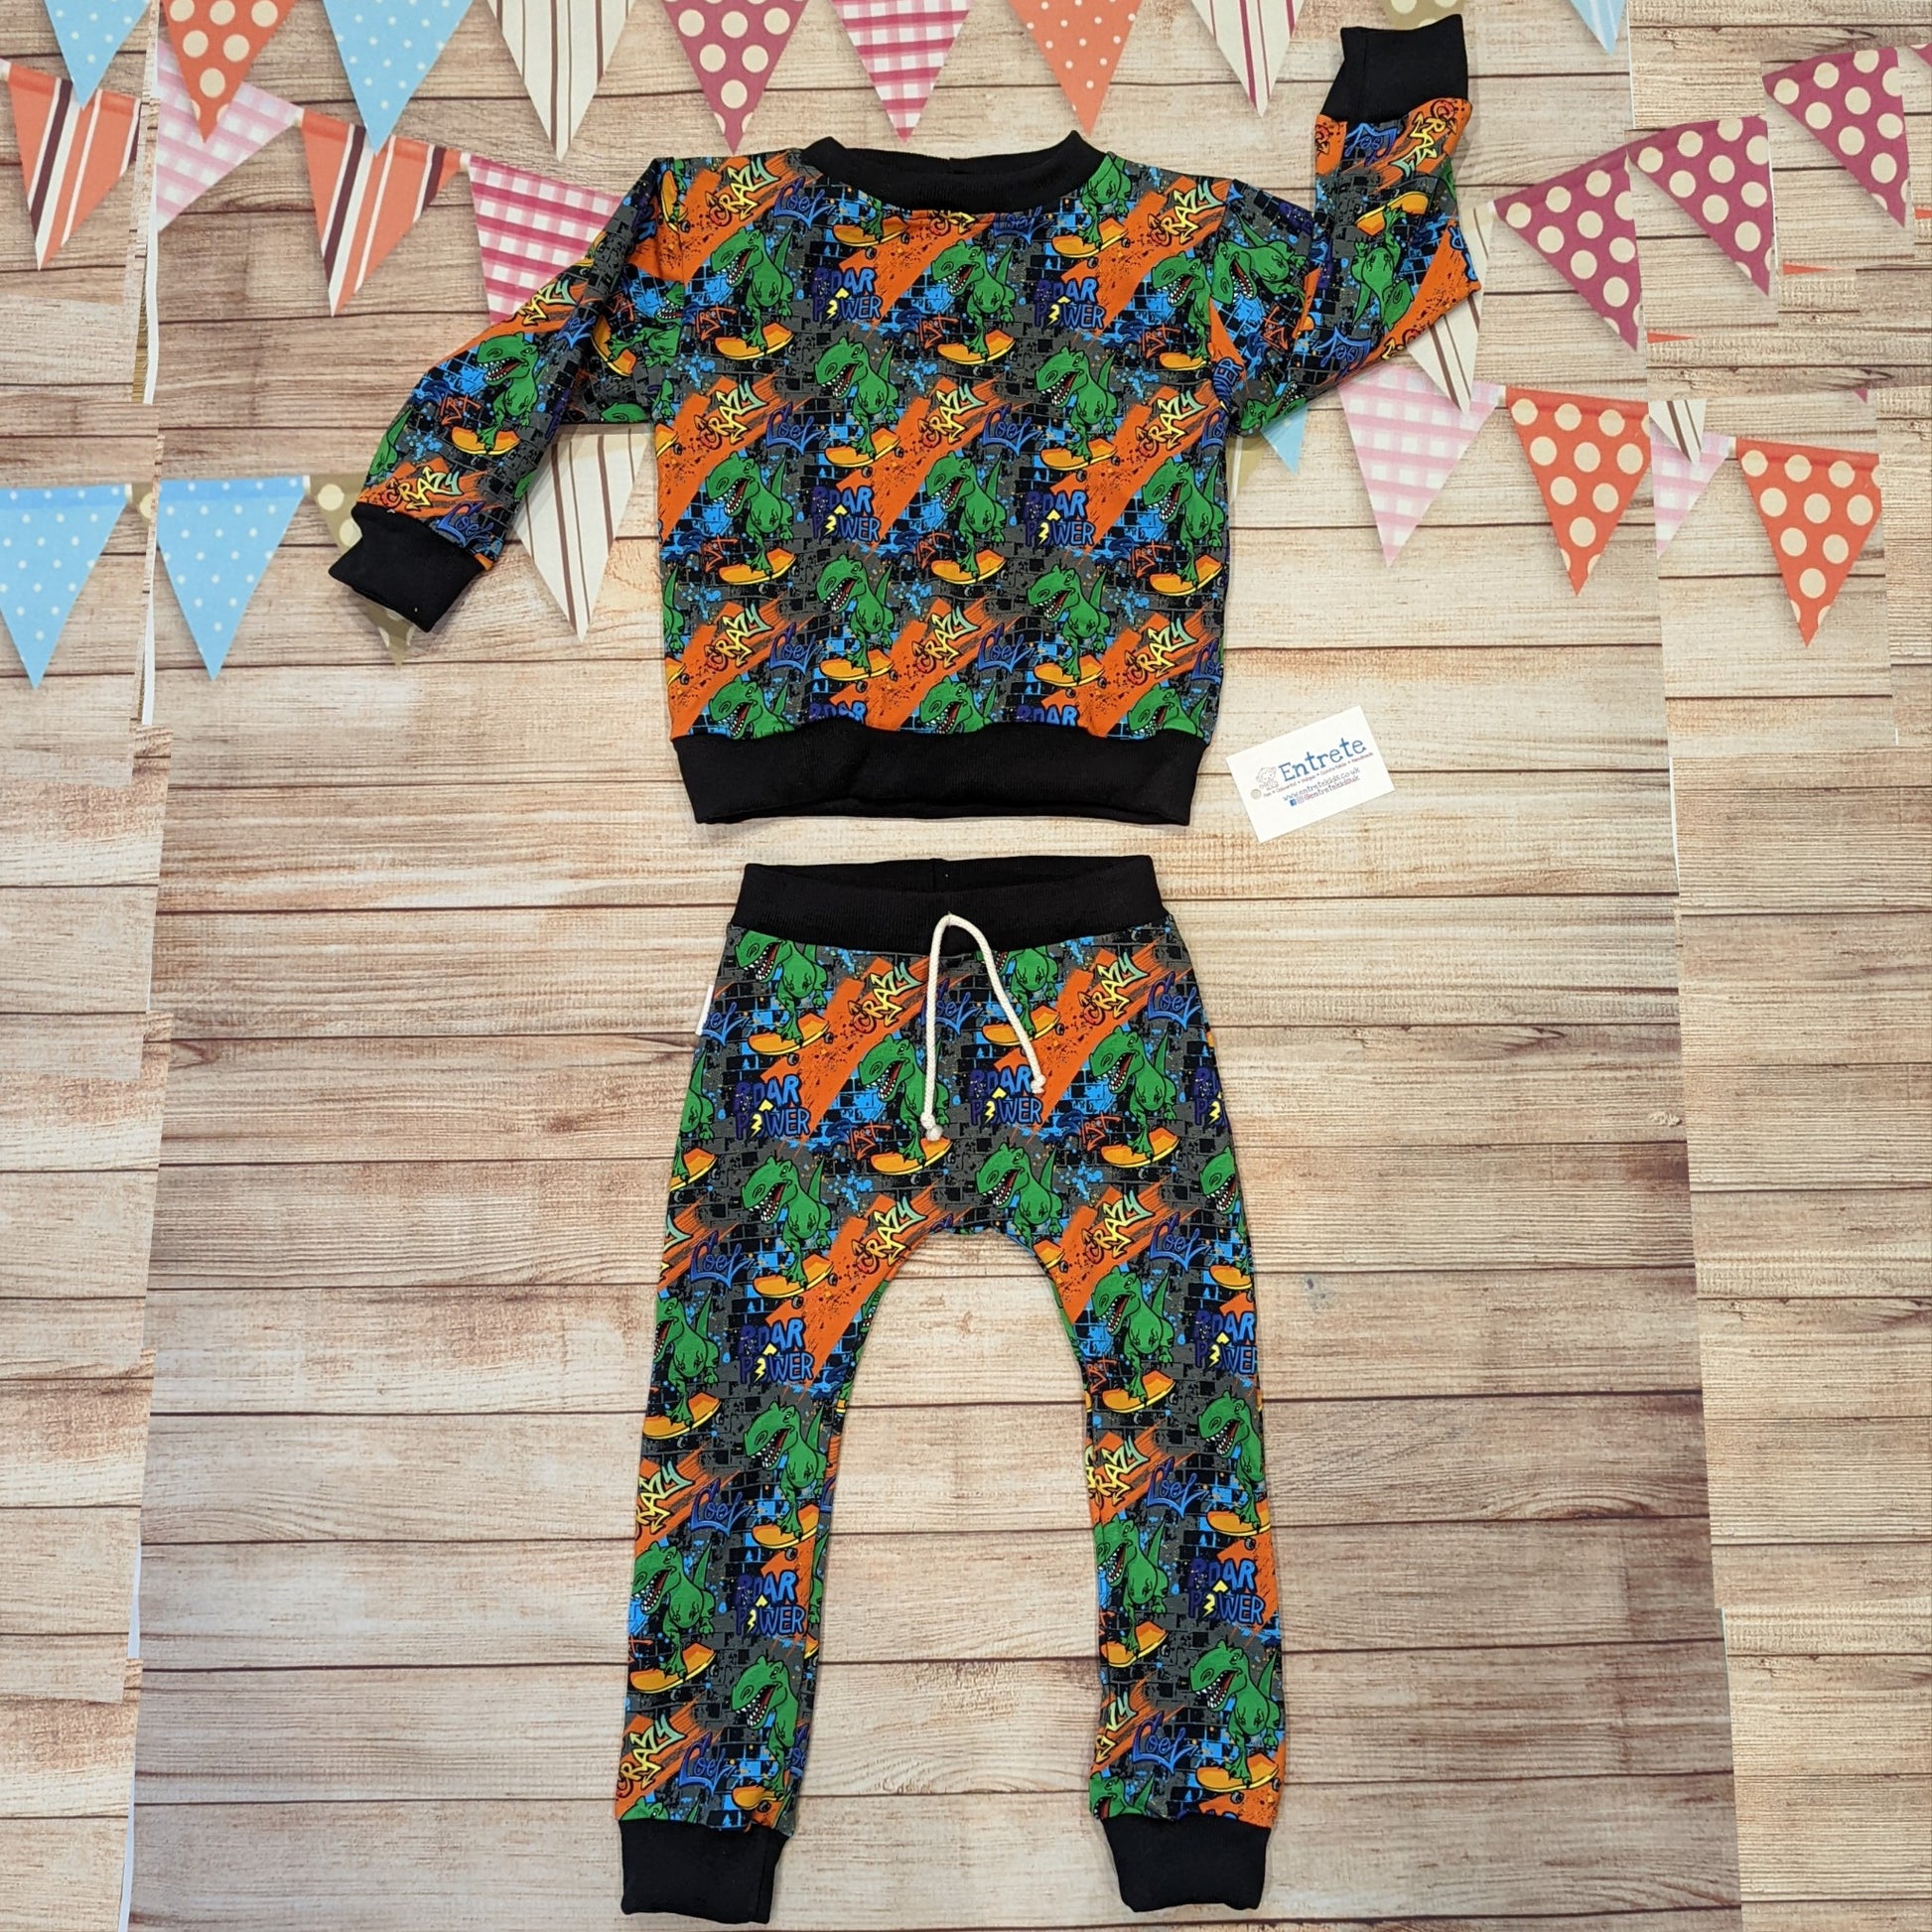 The insanely fun skateboarding dinosaurs harem joggers, shown as an outfit with a matching sweatshirt.